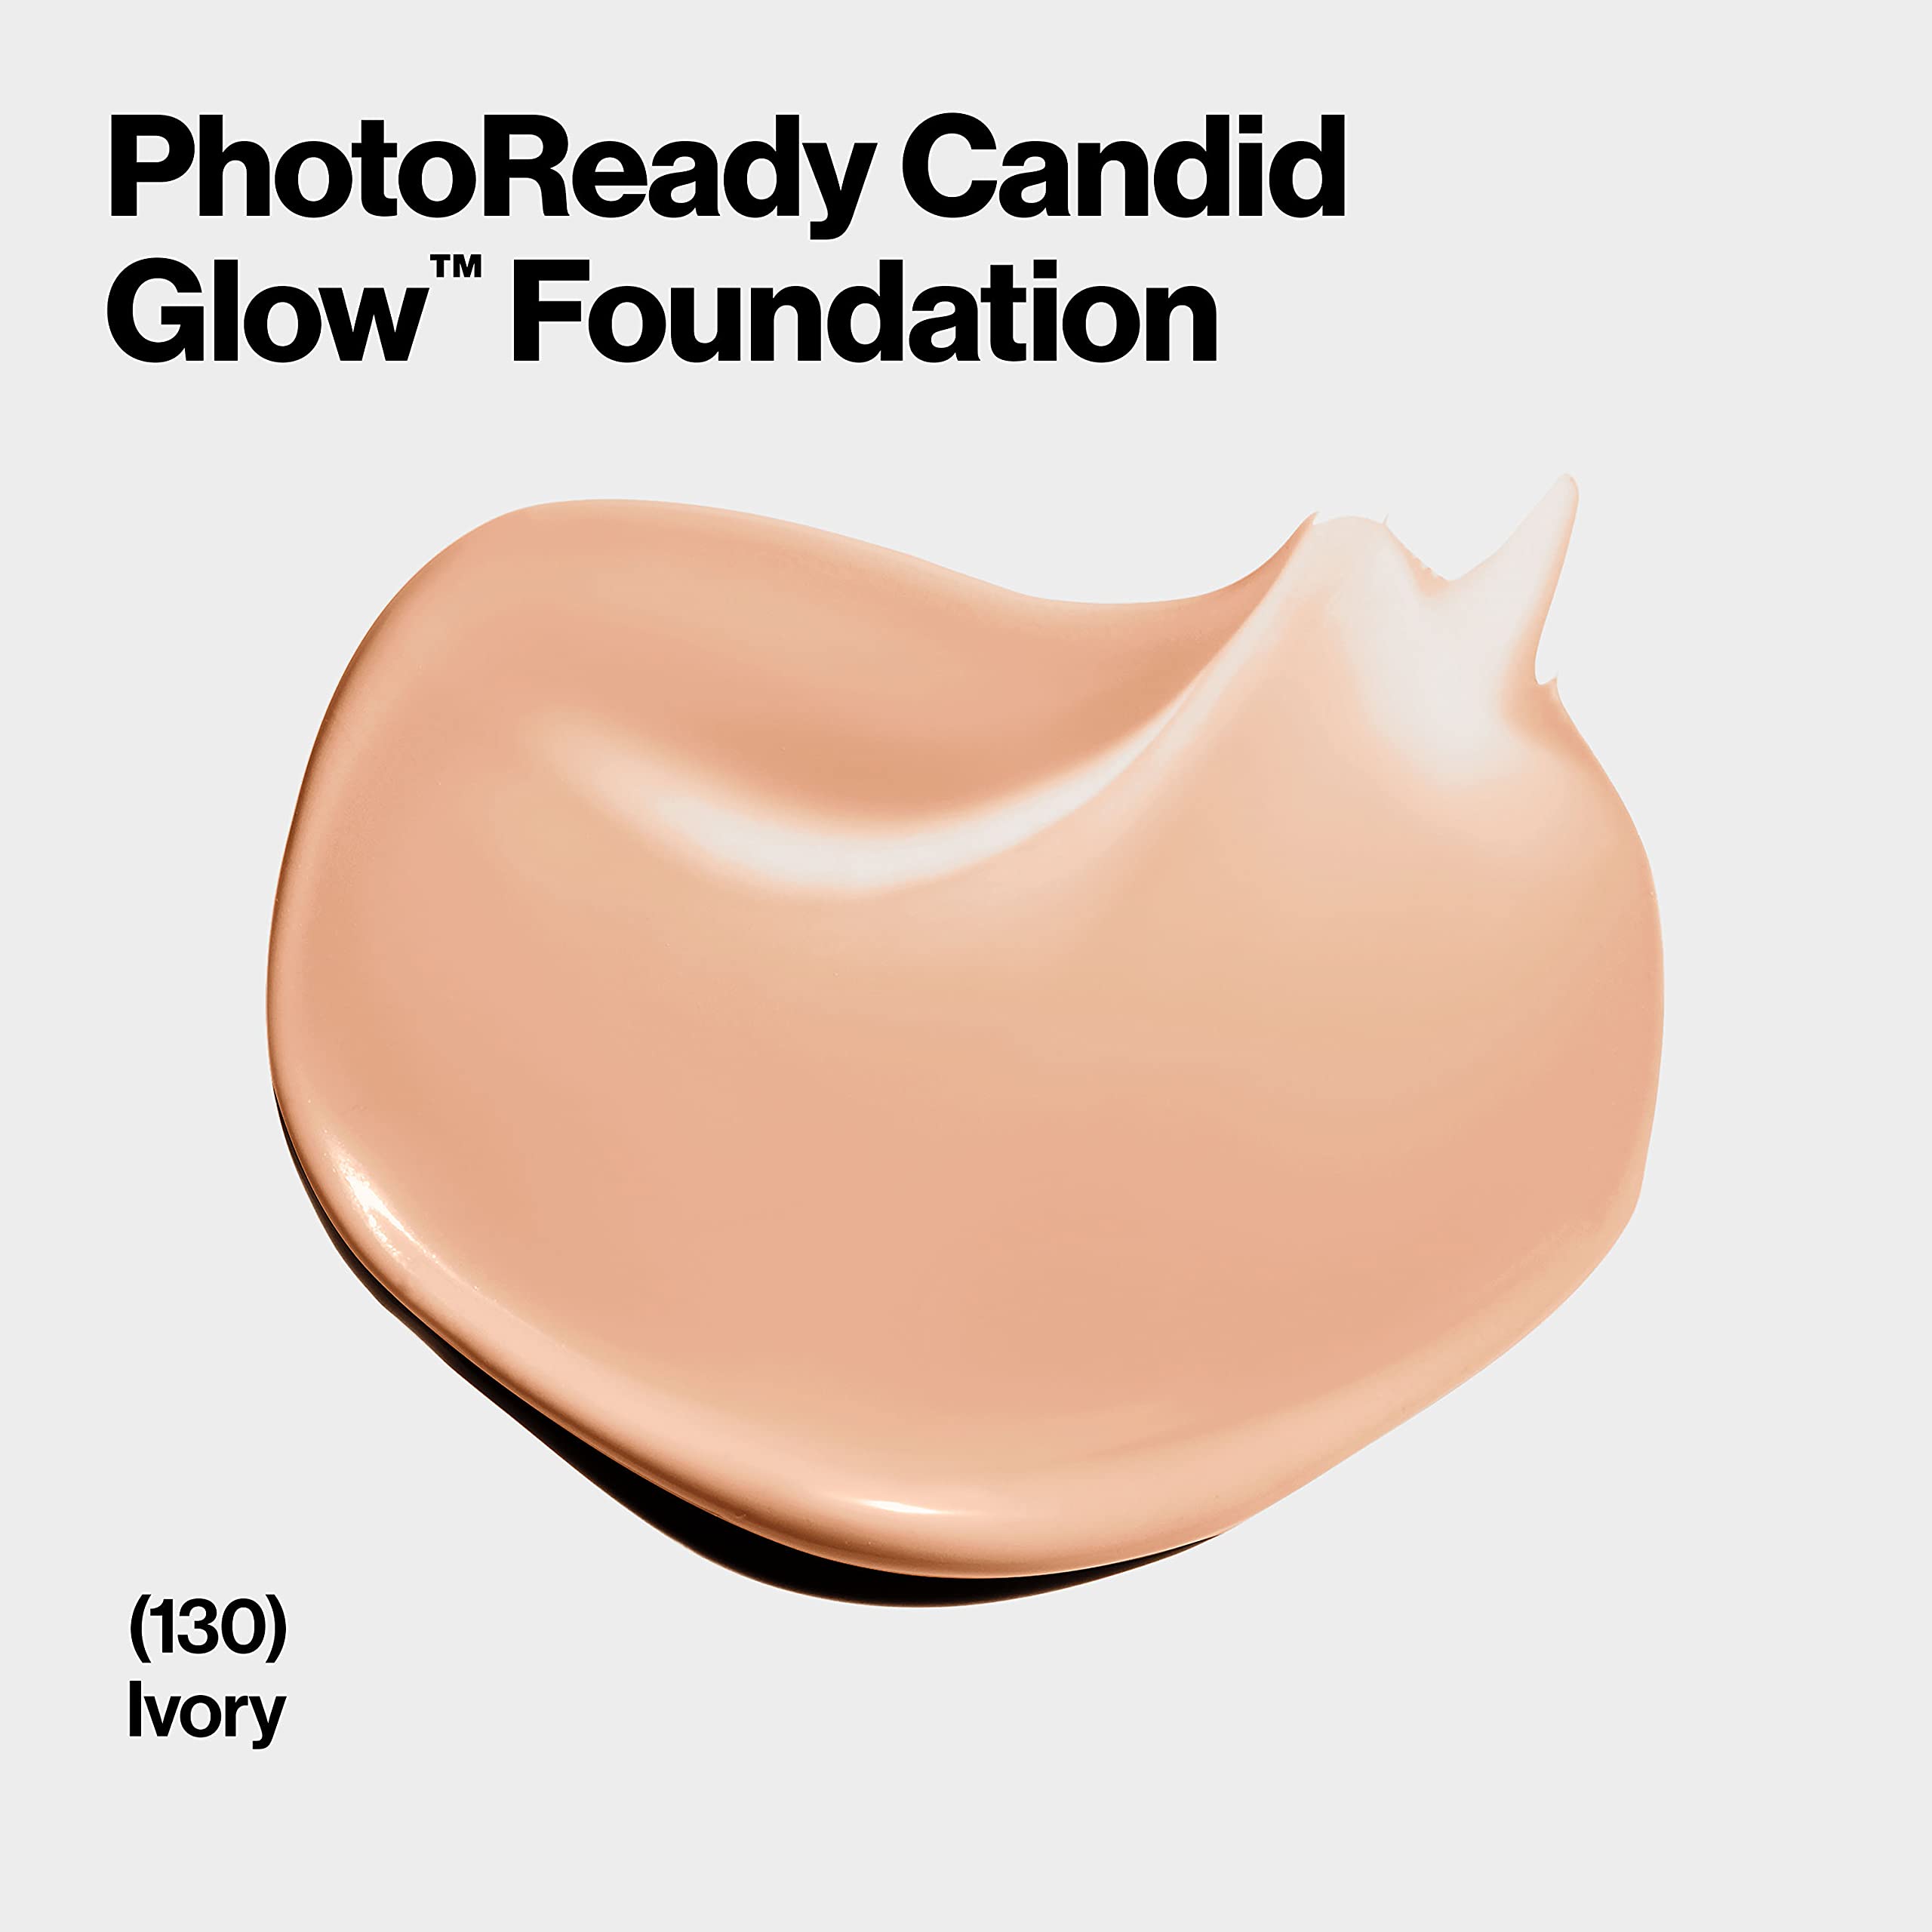 Revlon PhotoReady Candid Glow Moisture Glow Anti-Pollution Foundation with Vitamin E and Prickly Pear Oil, Anti-Blue Light Ingredients, without Parabens, Pthalates, and Fragrances, Ivory, 0.75 oz